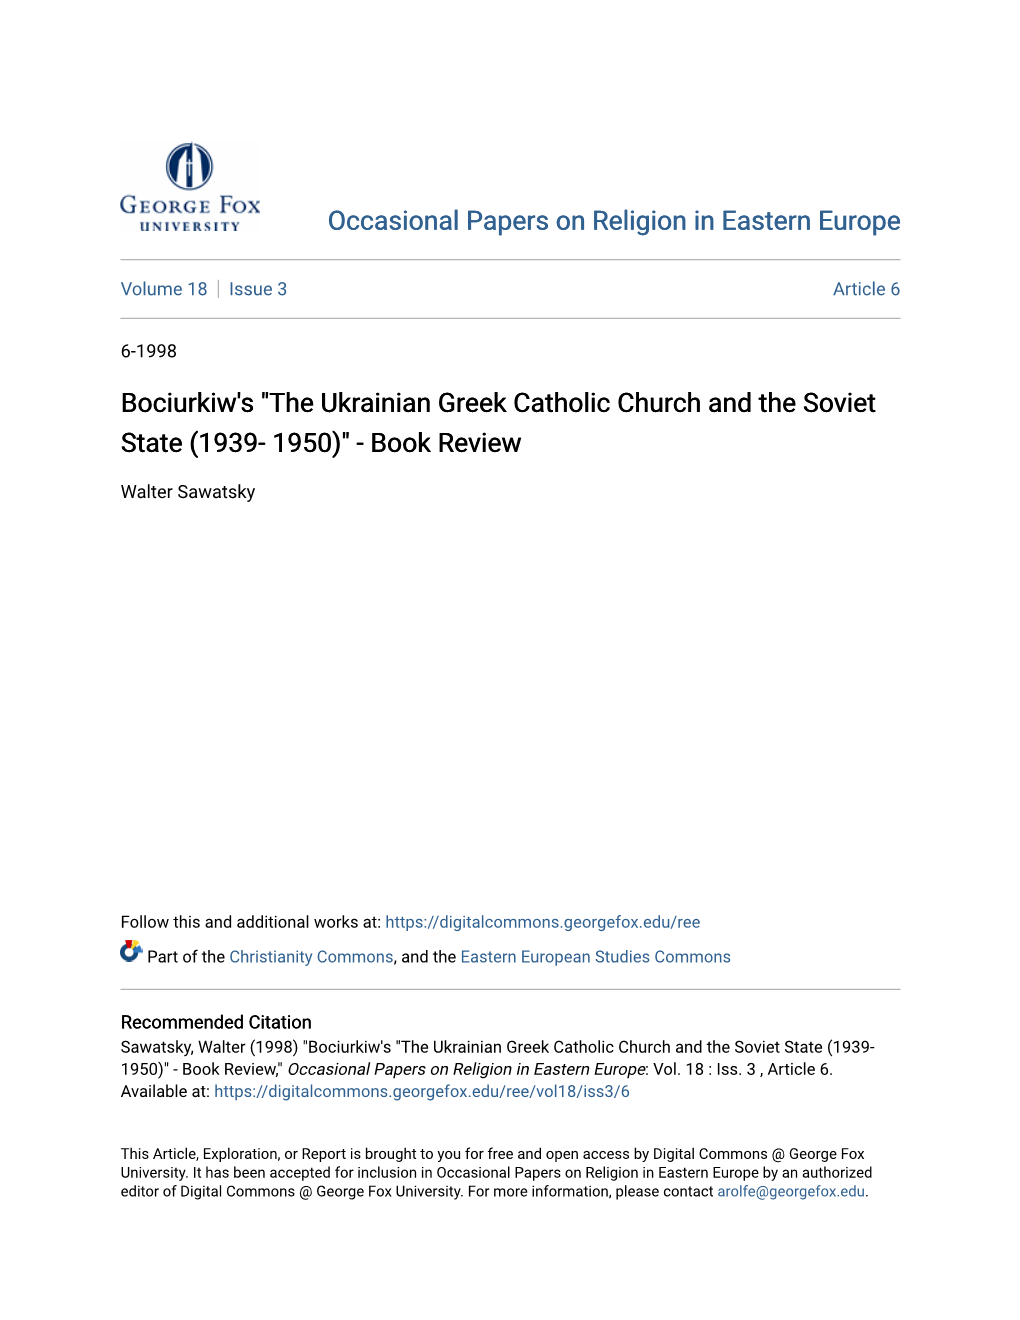 Bociurkiw's "The Ukrainian Greek Catholic Church and the Soviet State (1939- 1950)" - Book Review